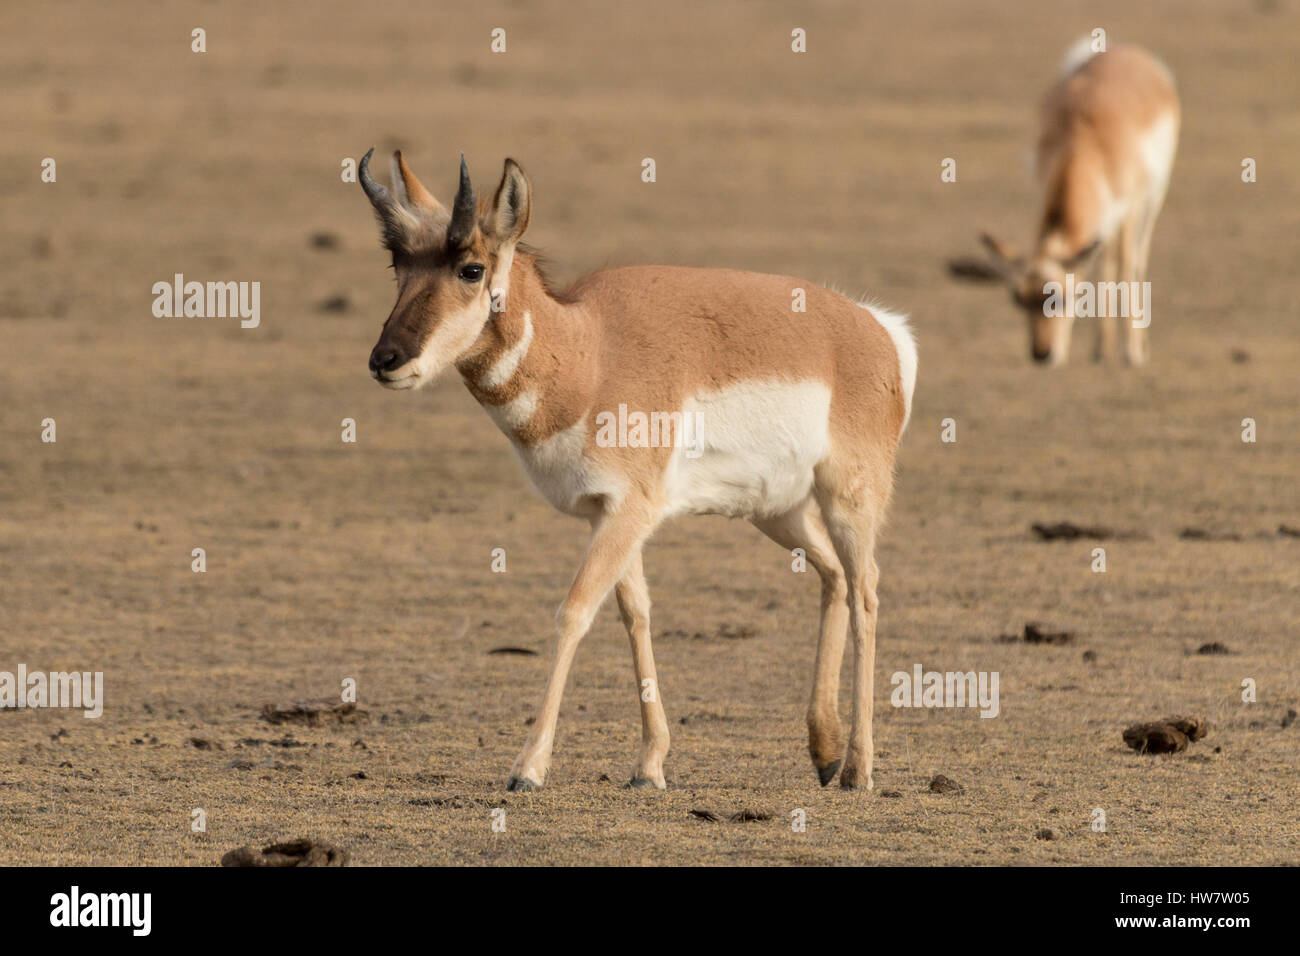 Pronghorn antelope in Yellowstone National Park, Wyoming. Stock Photo